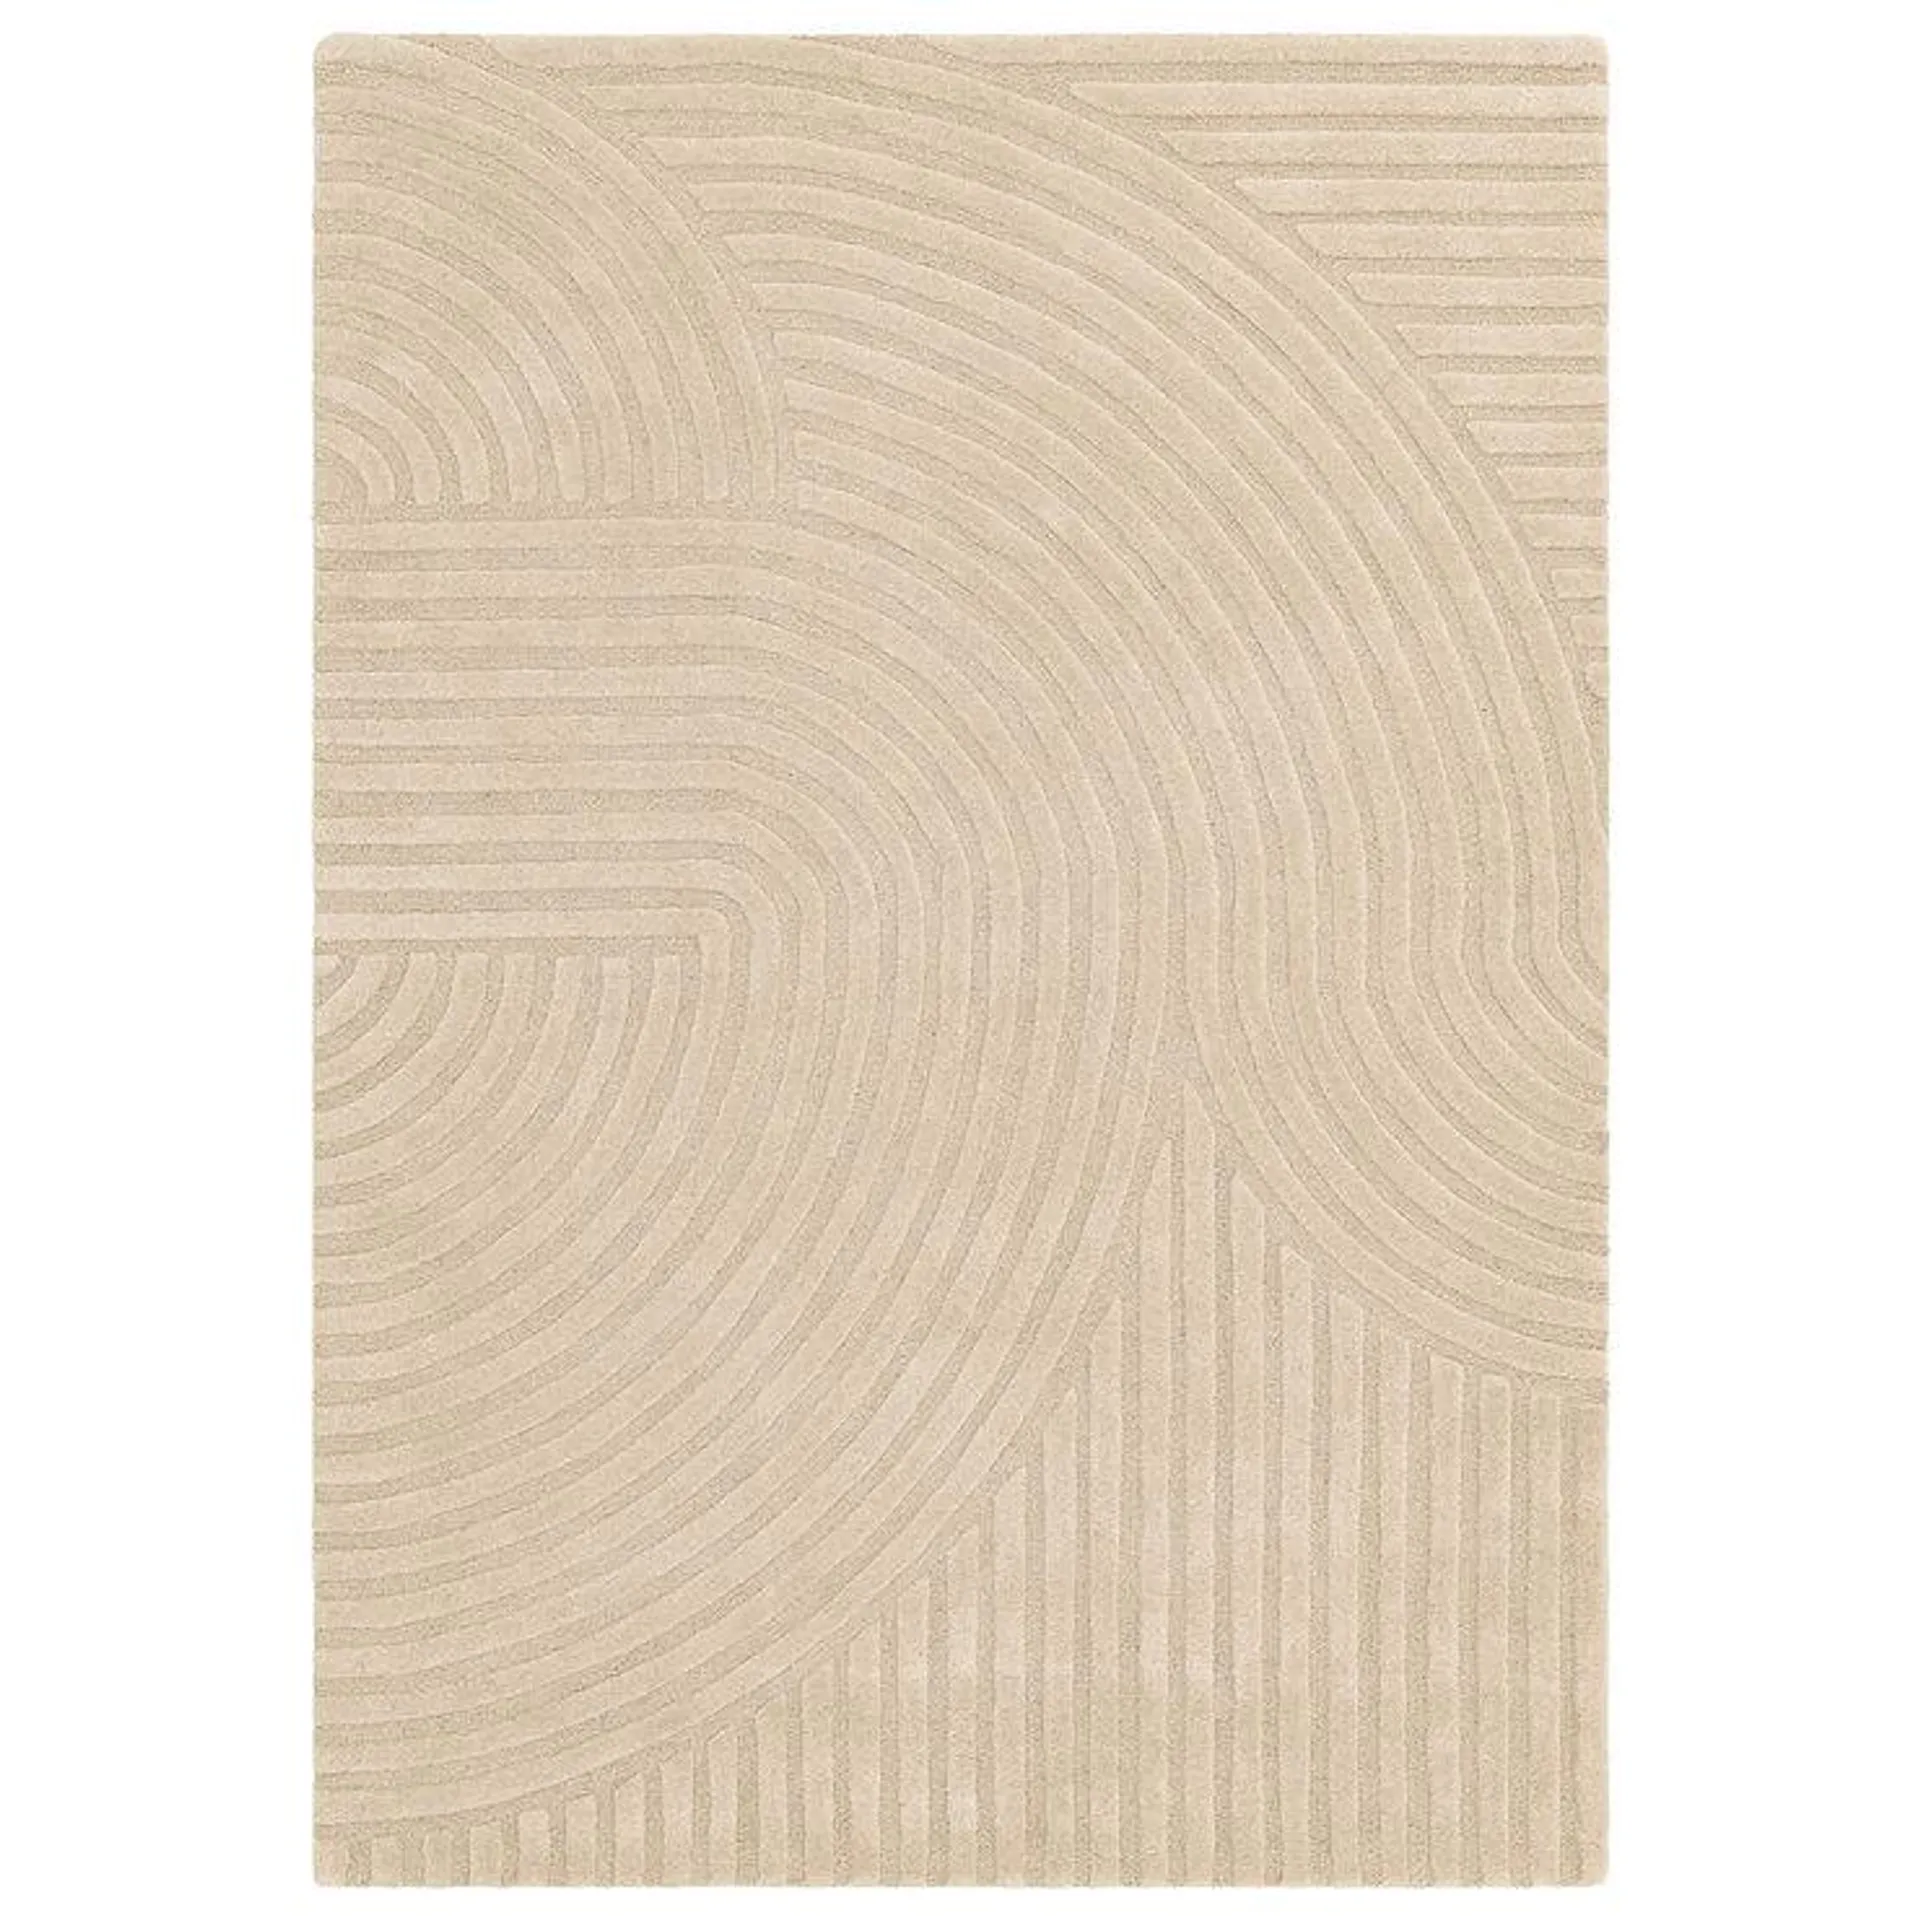 Hague Sand Rug, in 3 Sizes